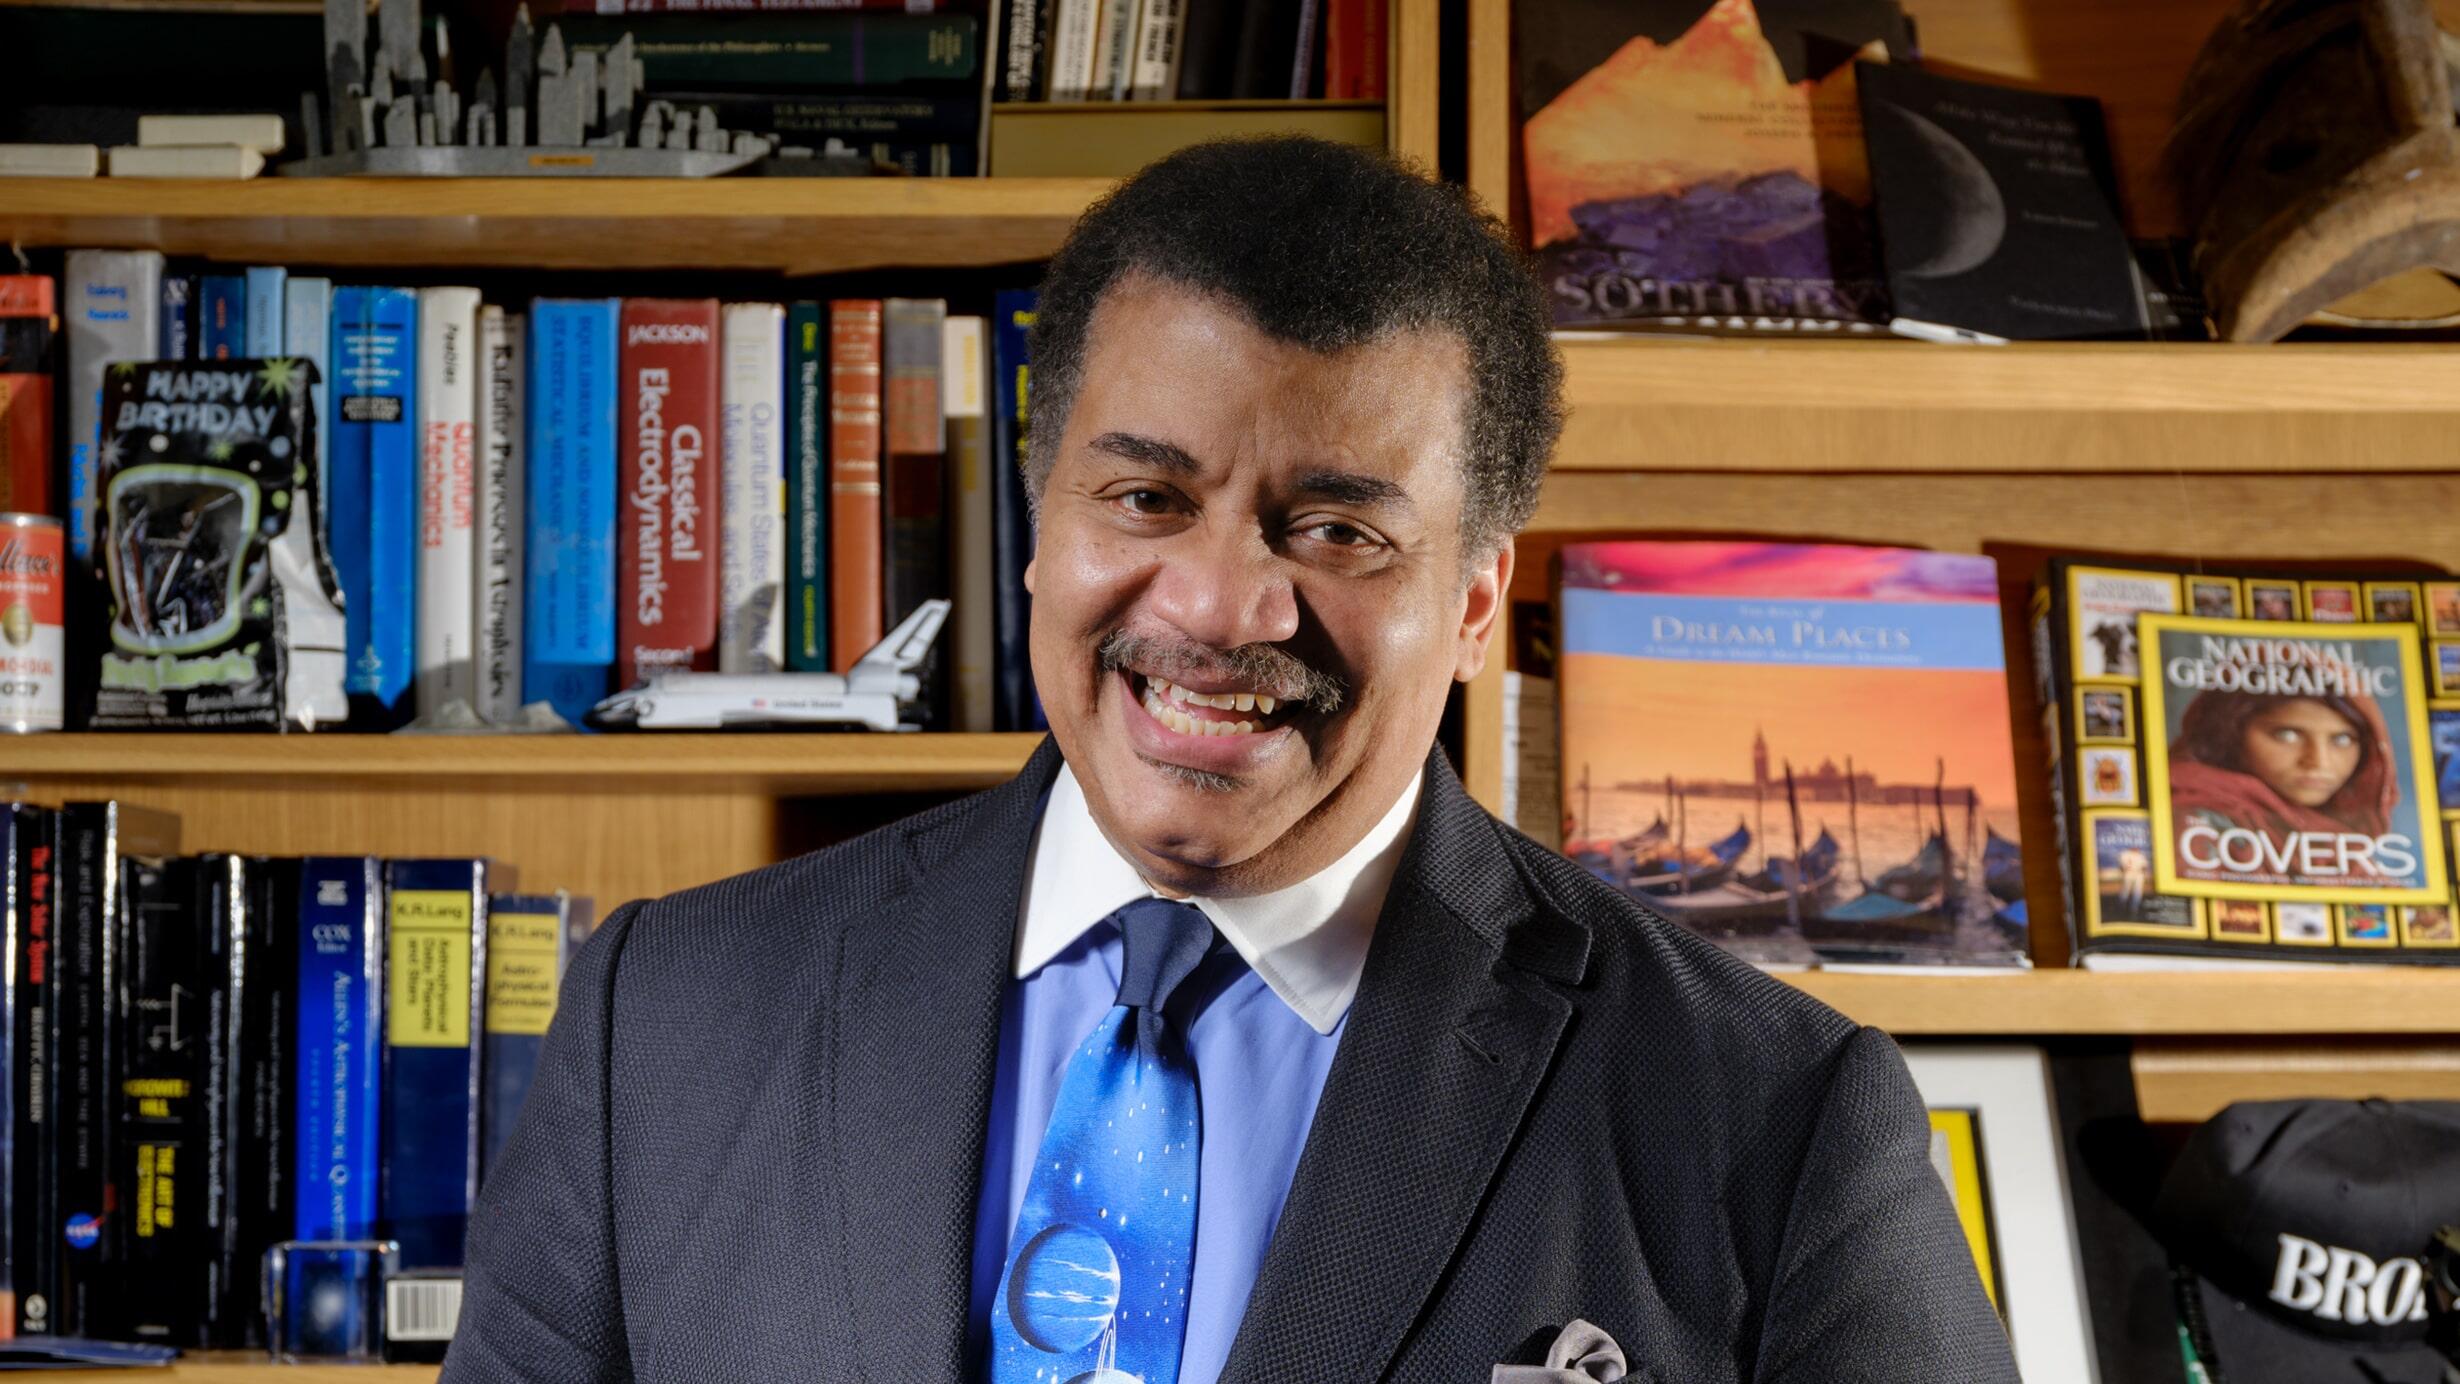 A portrait of astrophysicist Neil deGrasse Tyson, seen wearing a colorful tie depicting the solar system, shelves of books in the background.